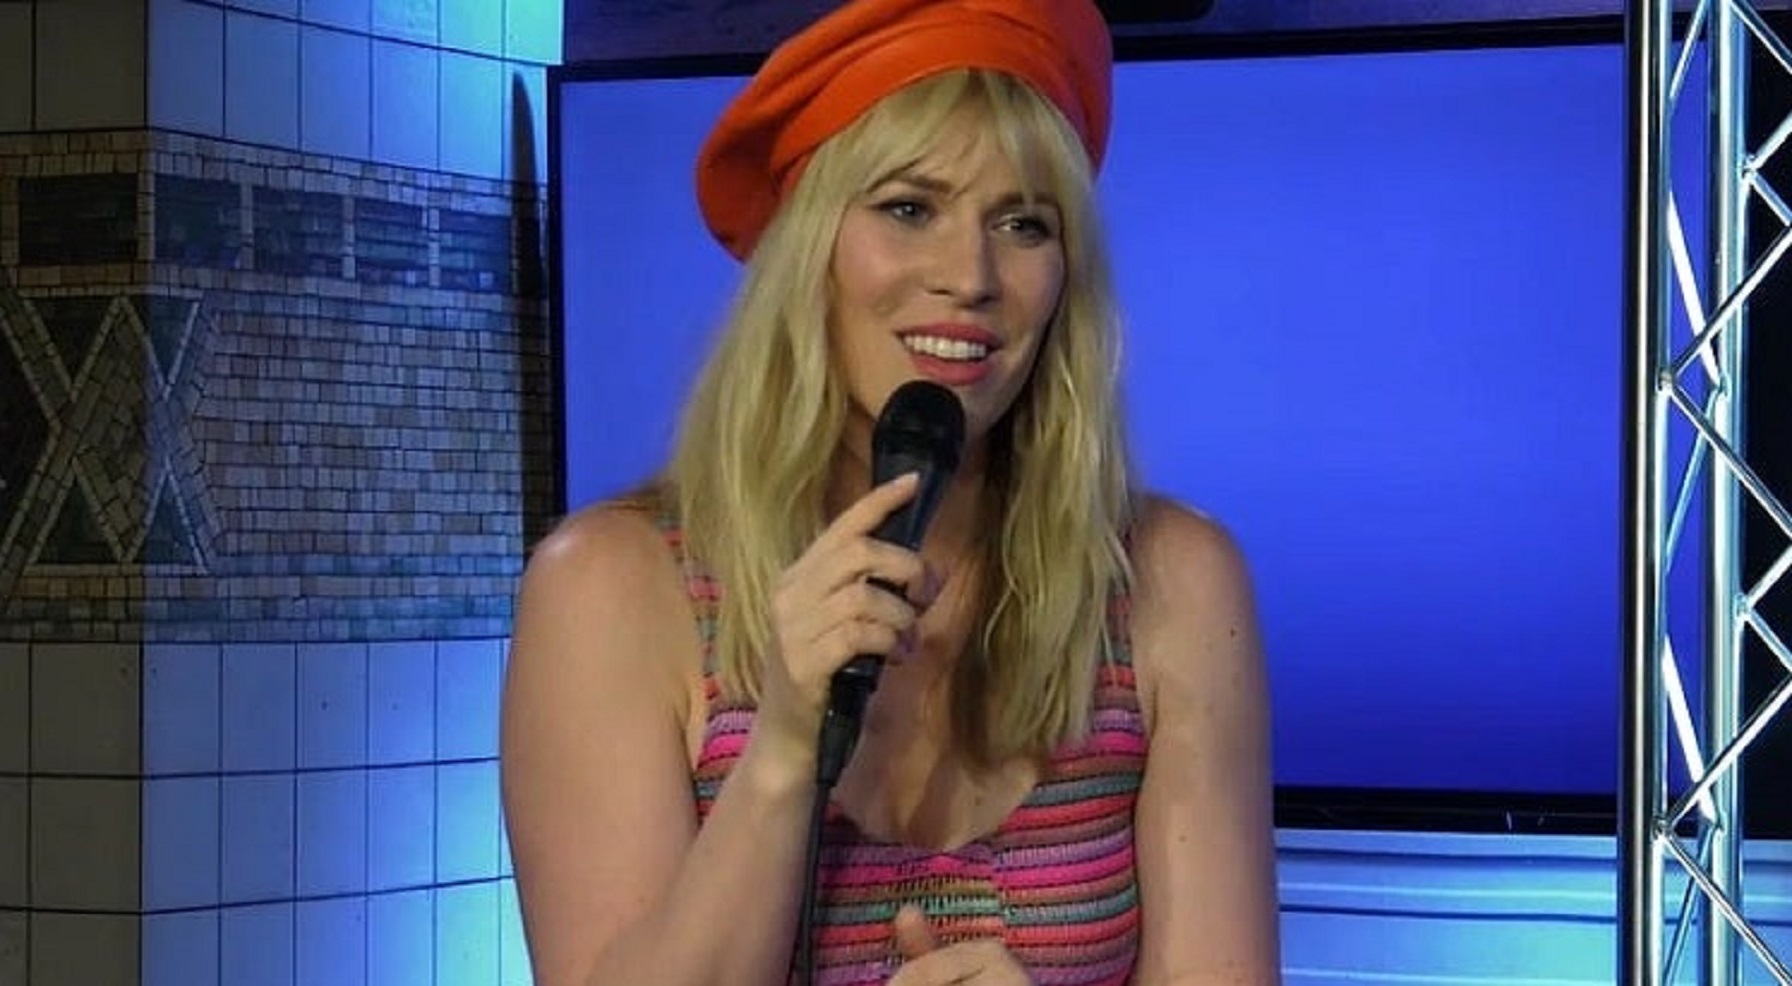 Natasha Bedingfield is Back! Watch Her Perform New Song From First Album in 9 Years!